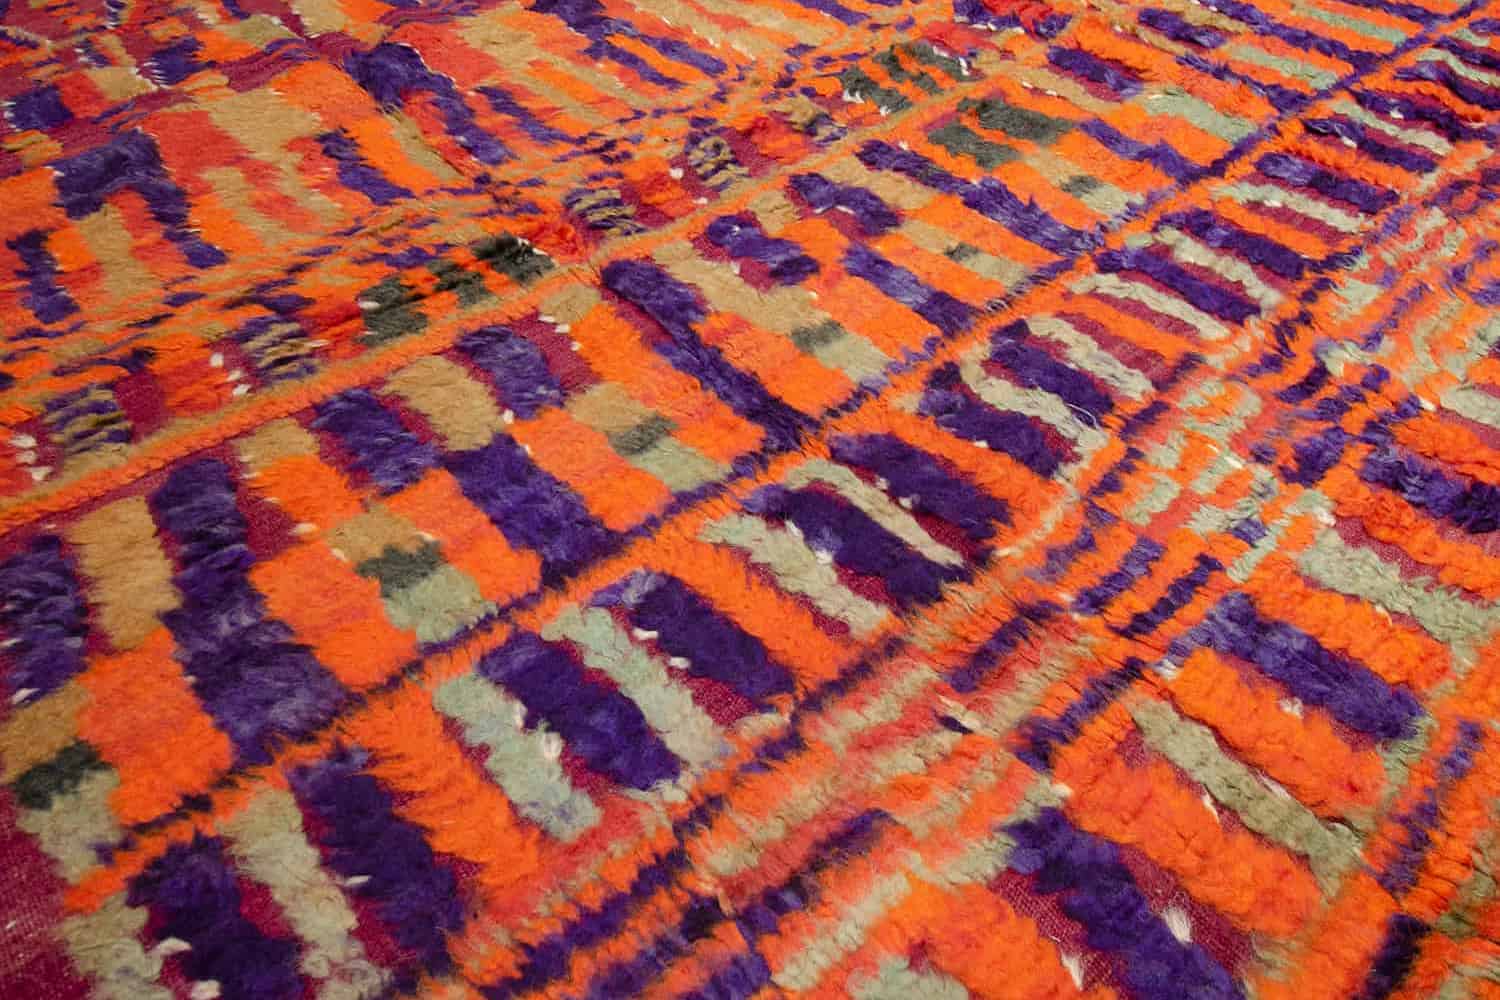 Typical colouring of an Ait Bou Ichaouen rug